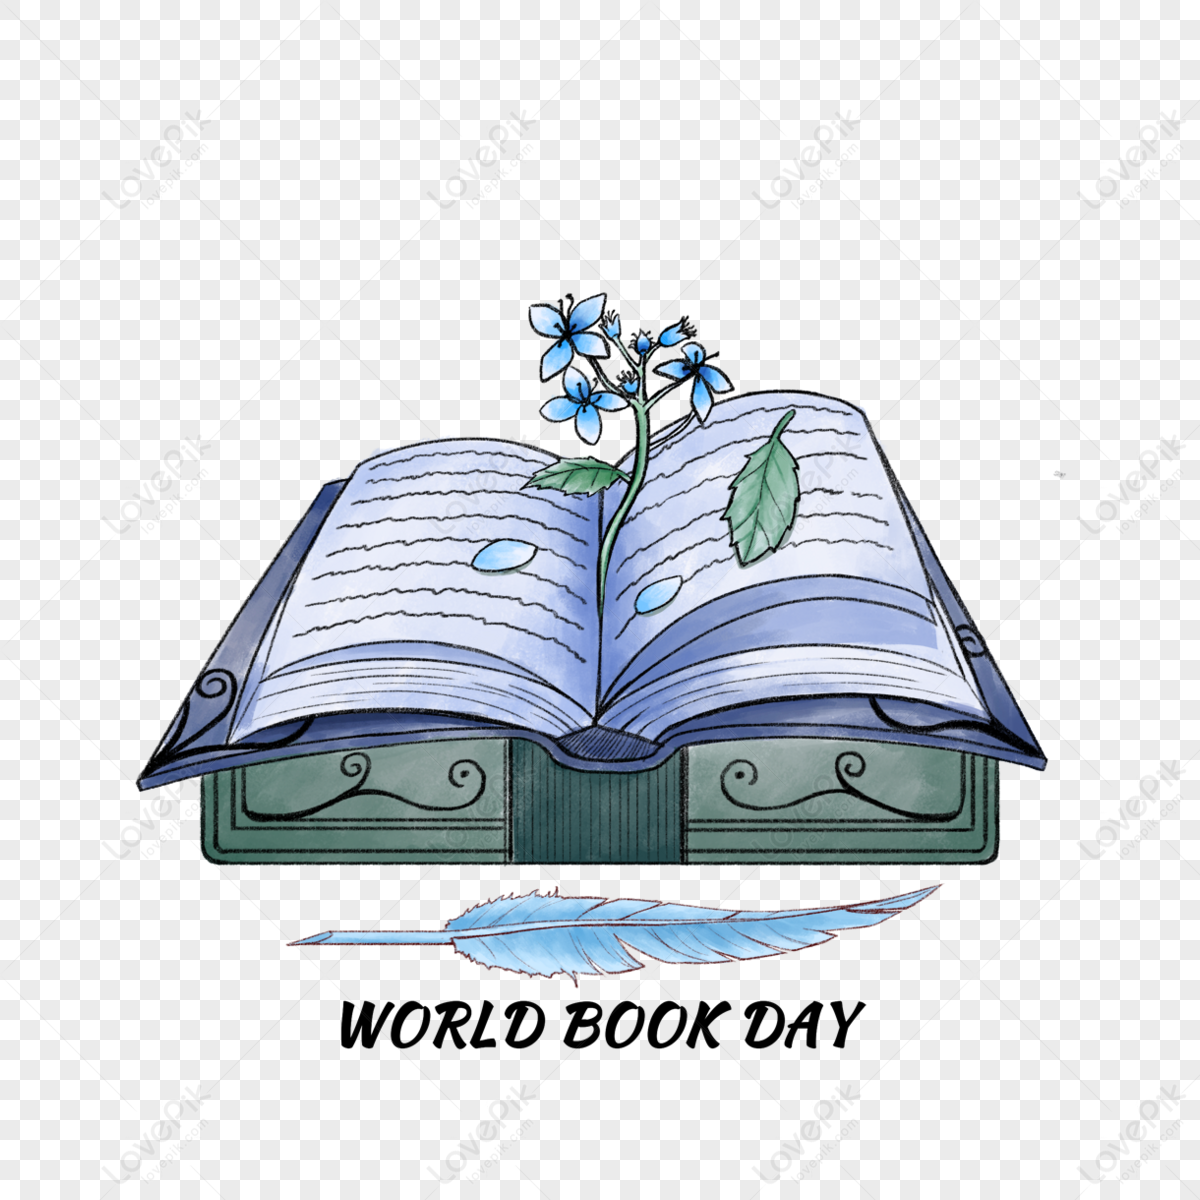 World Book Day Posters for Sale | Redbubble